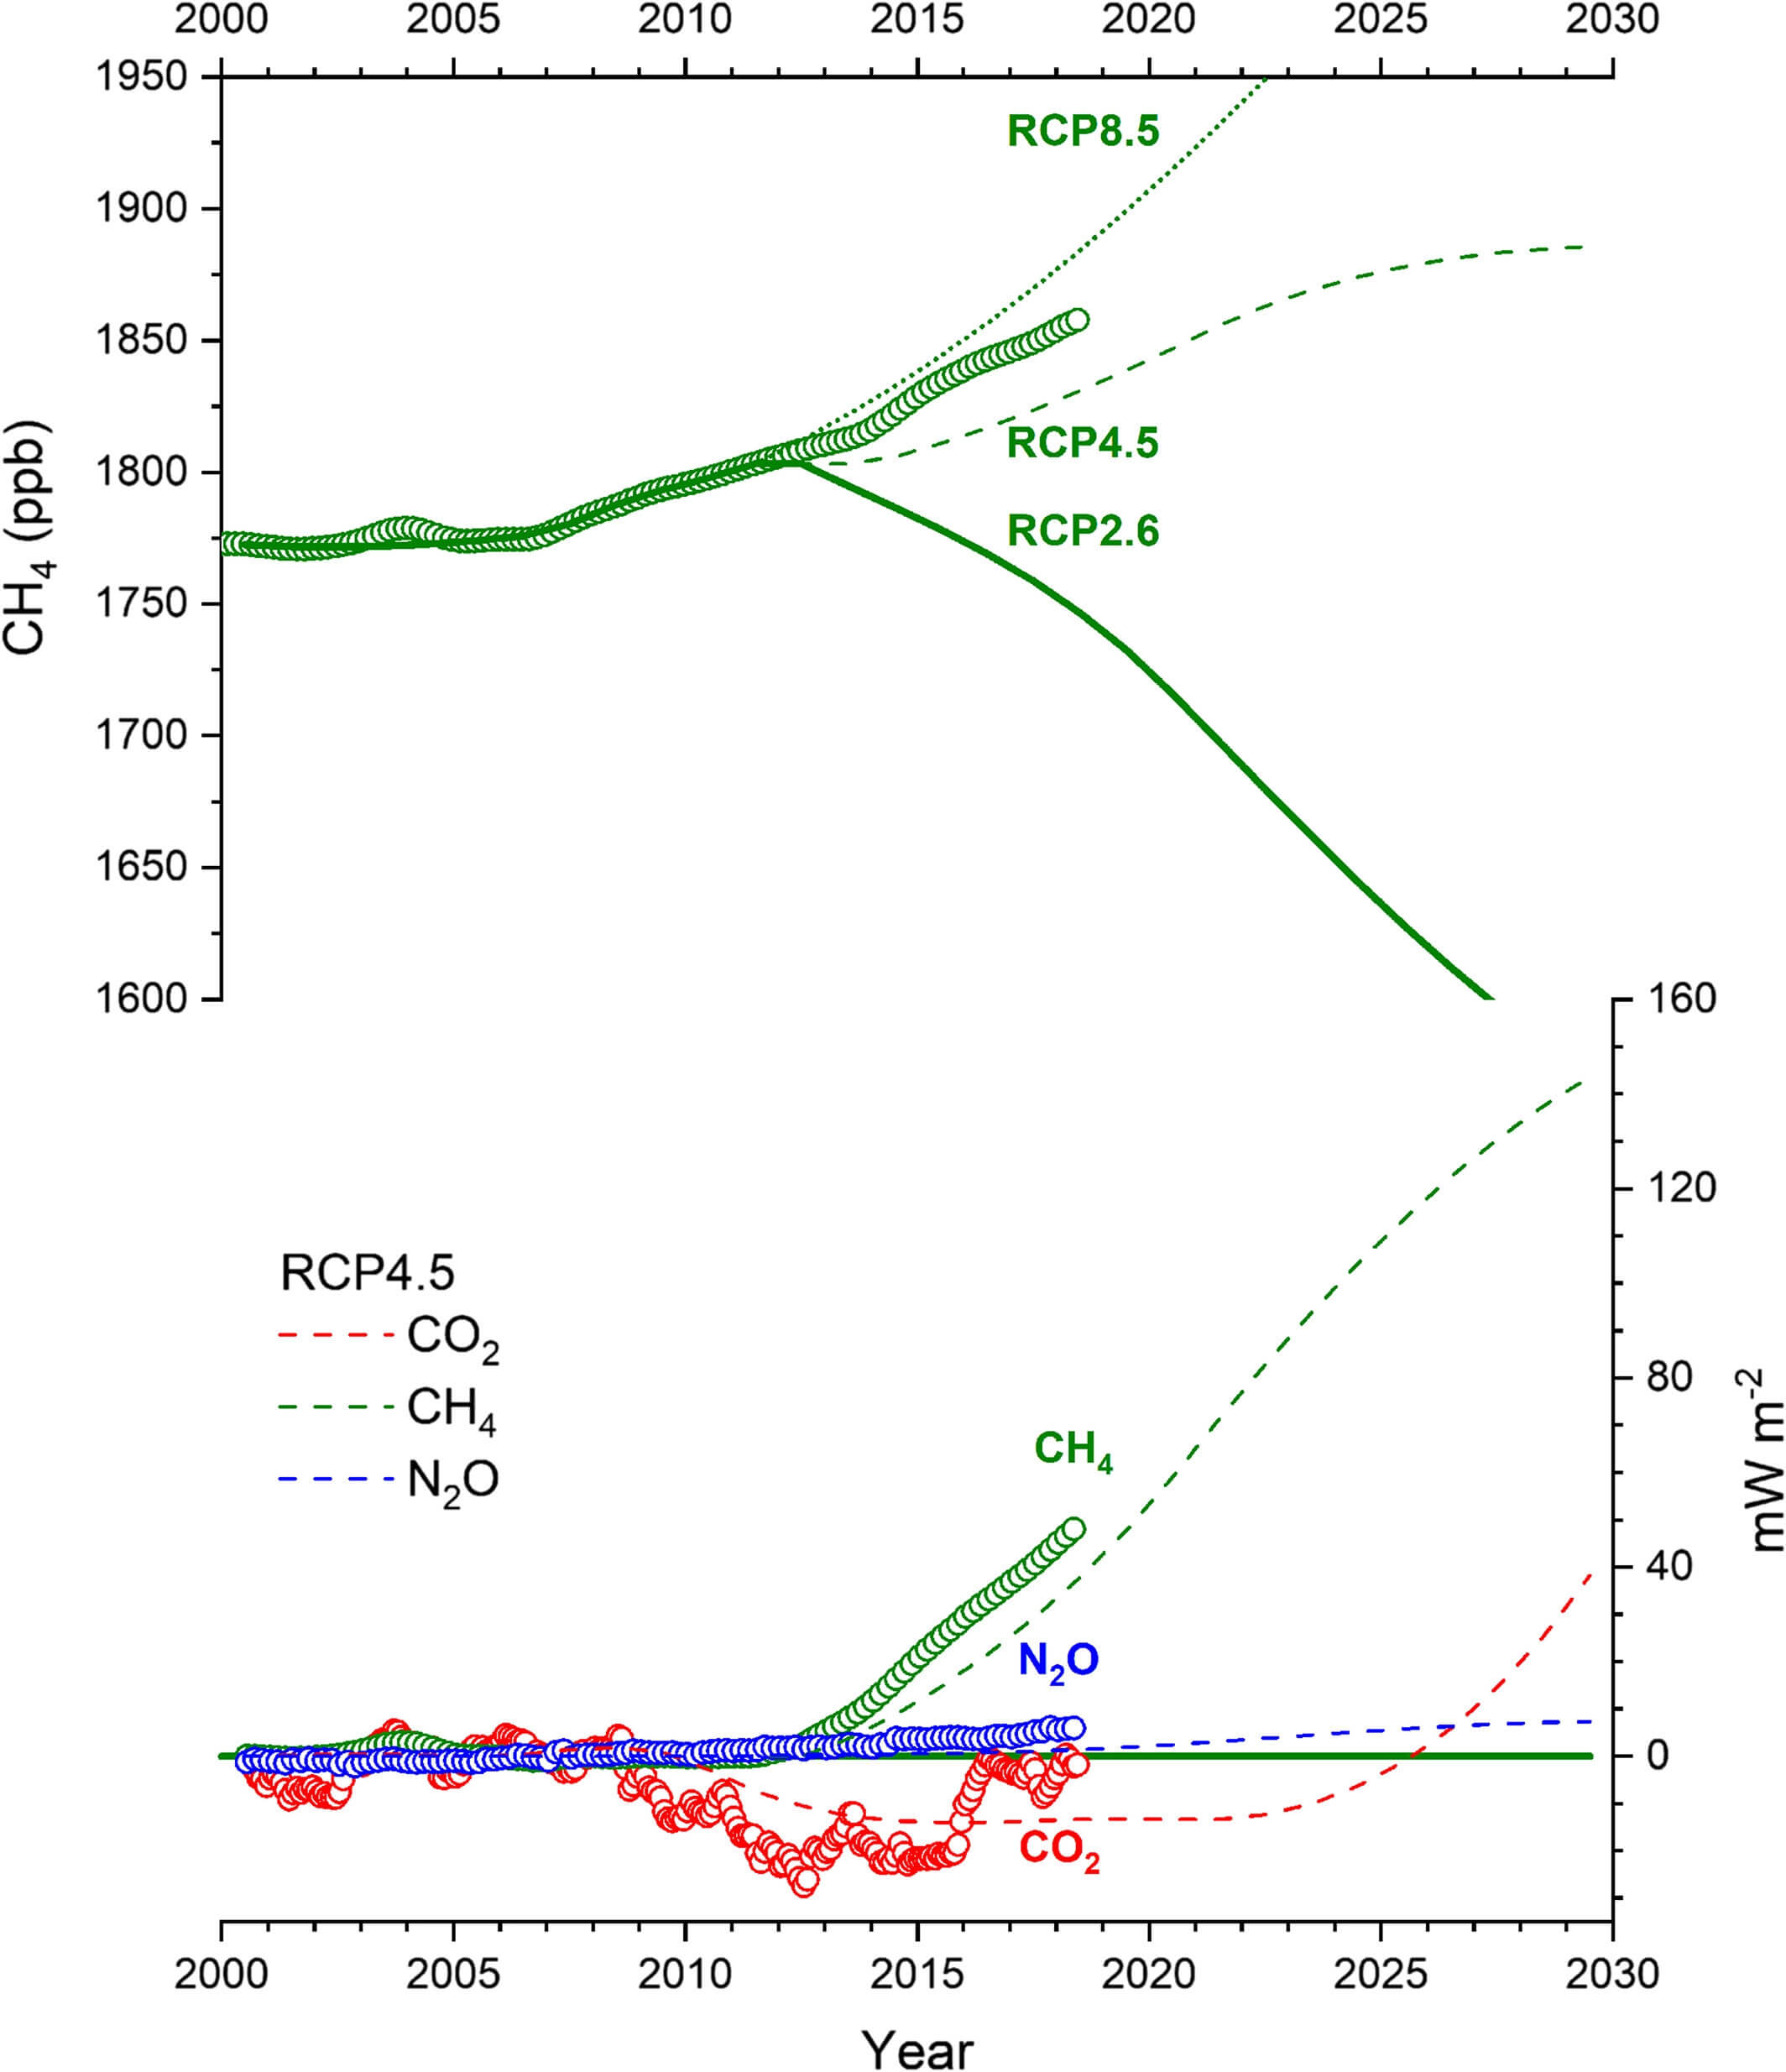 Two line graphs of methane emissions under different representative concentration pathway (RCP) showing current methane emissions exists those under RCP4.5